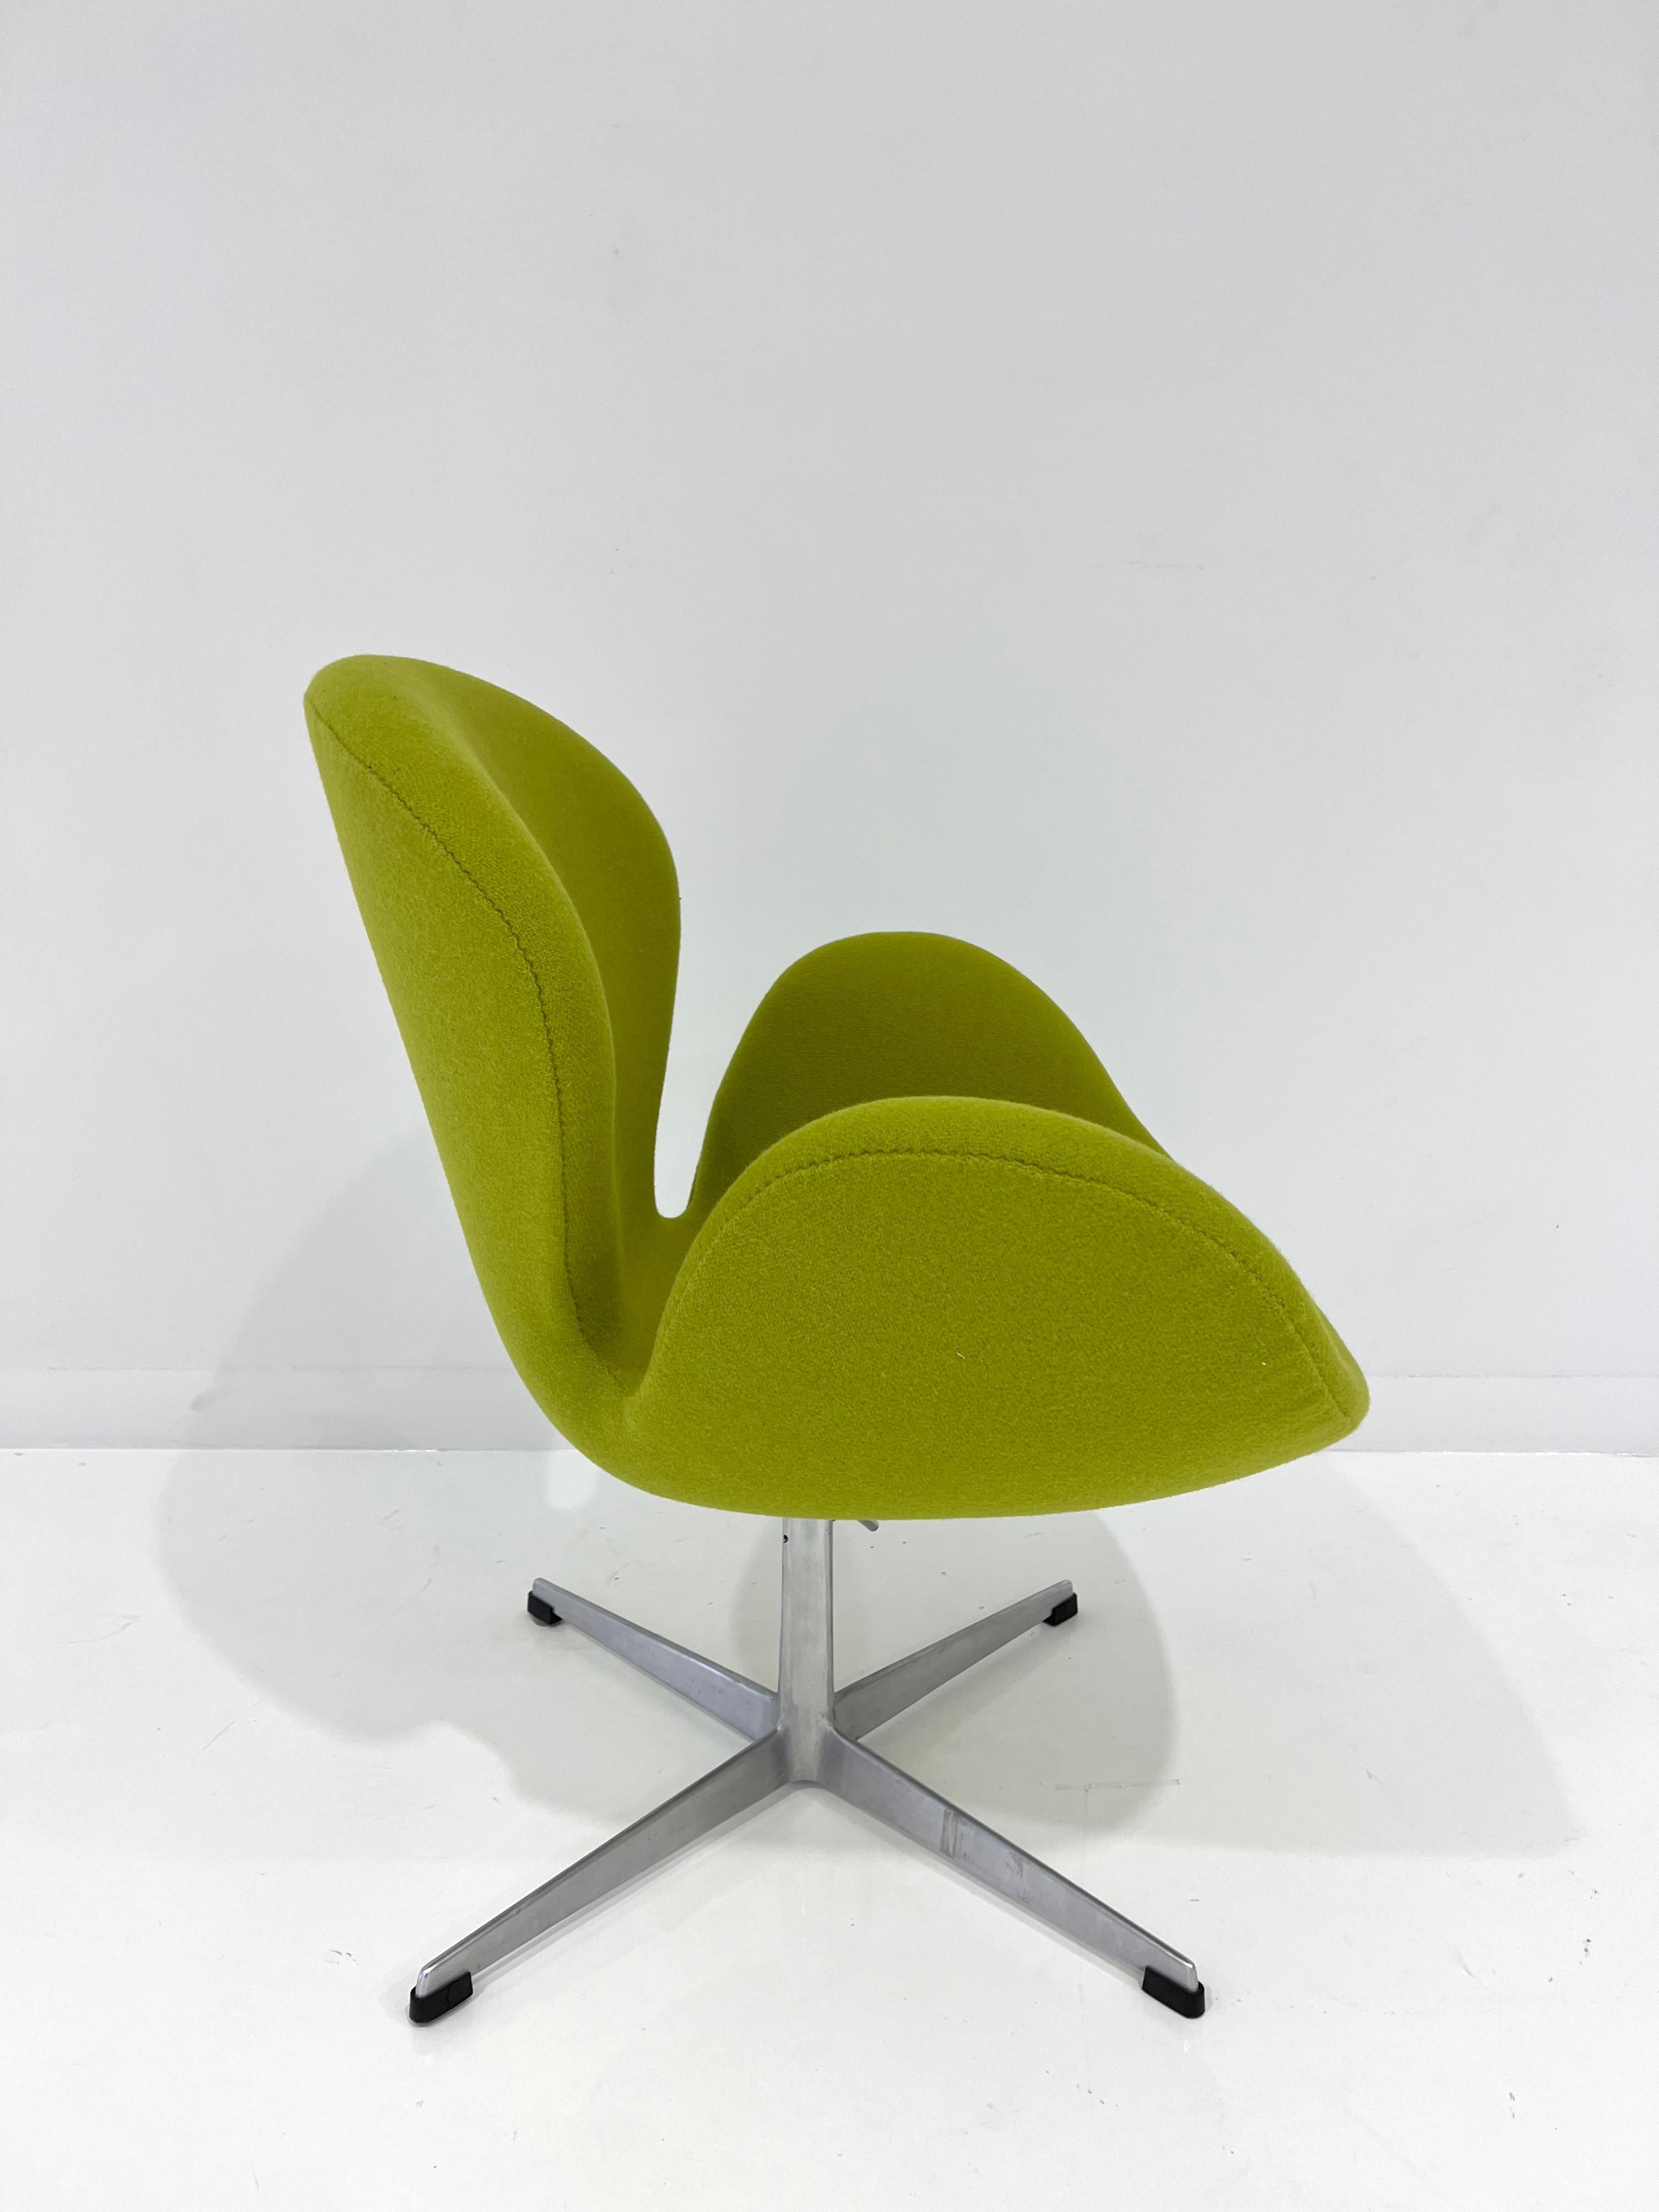 Swan Chair by Arne Jacobsen for Fritz Hansen. Denmark circa 1960's.
An elegant and organic shape ideal for lounge. Arne Jacobsen was very productive both as an architect and as a designer. His cooperation with Fritz Hansen dates back to 1934.
The